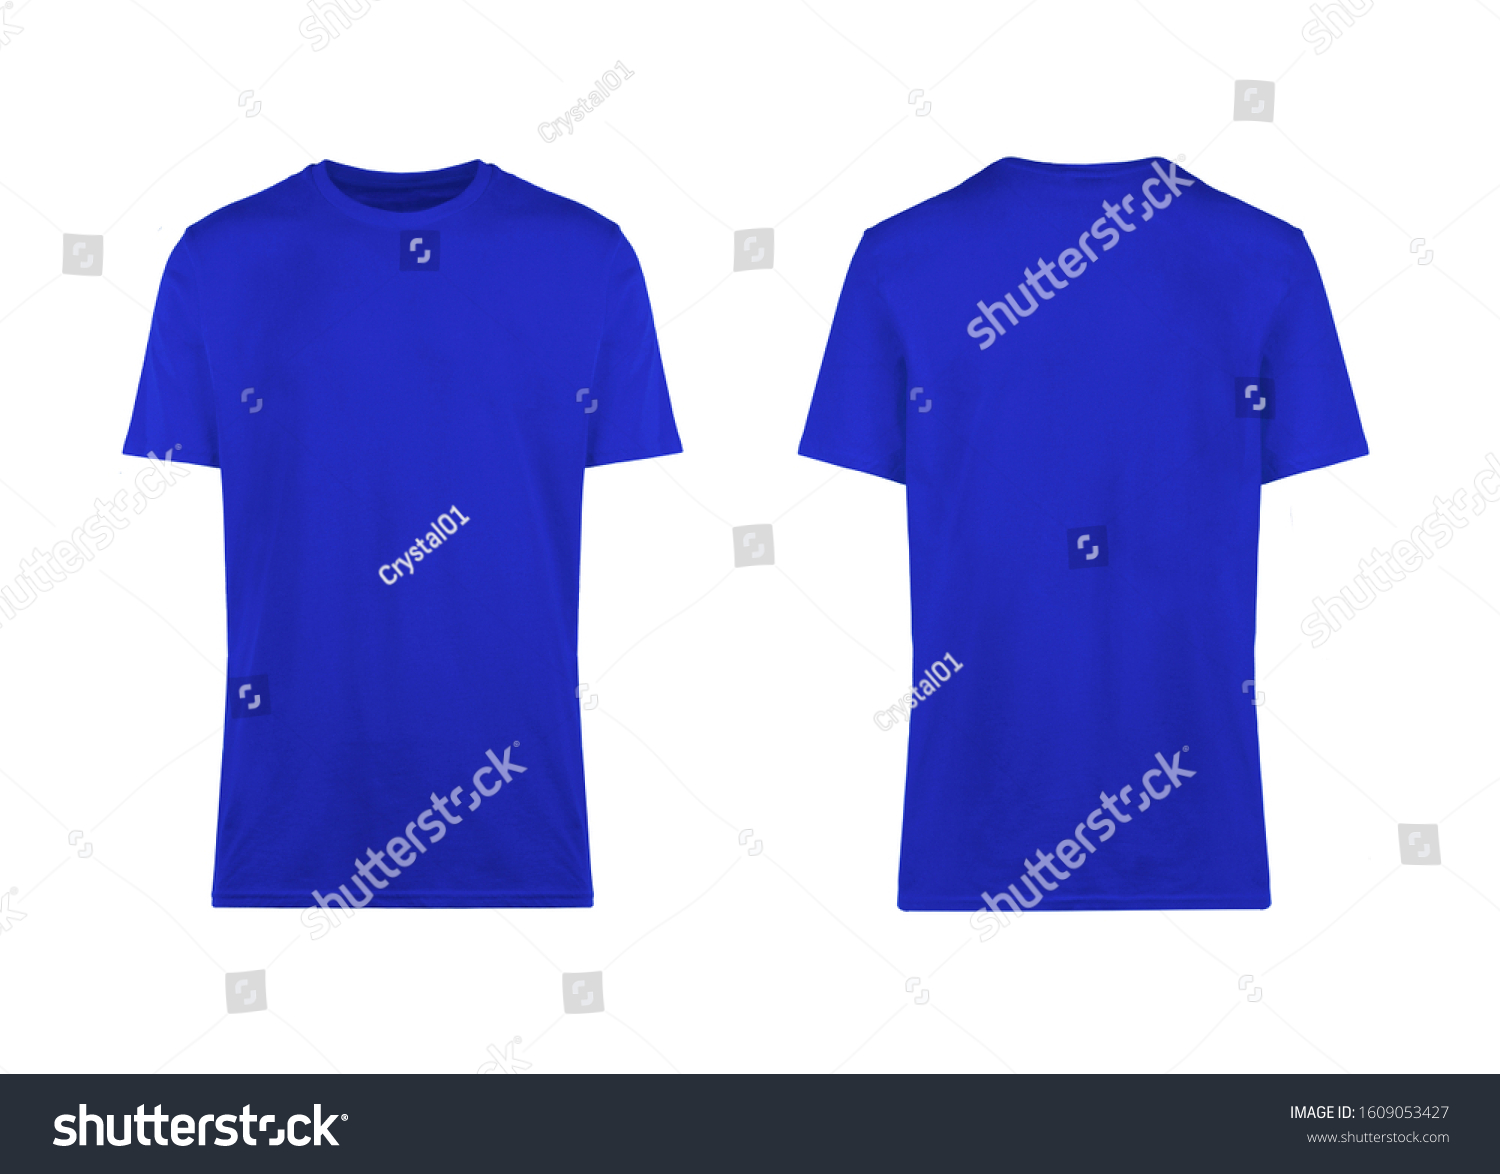 Blue Tshirt Front Back View Clothes Stock Photo 1609053427 | Shutterstock